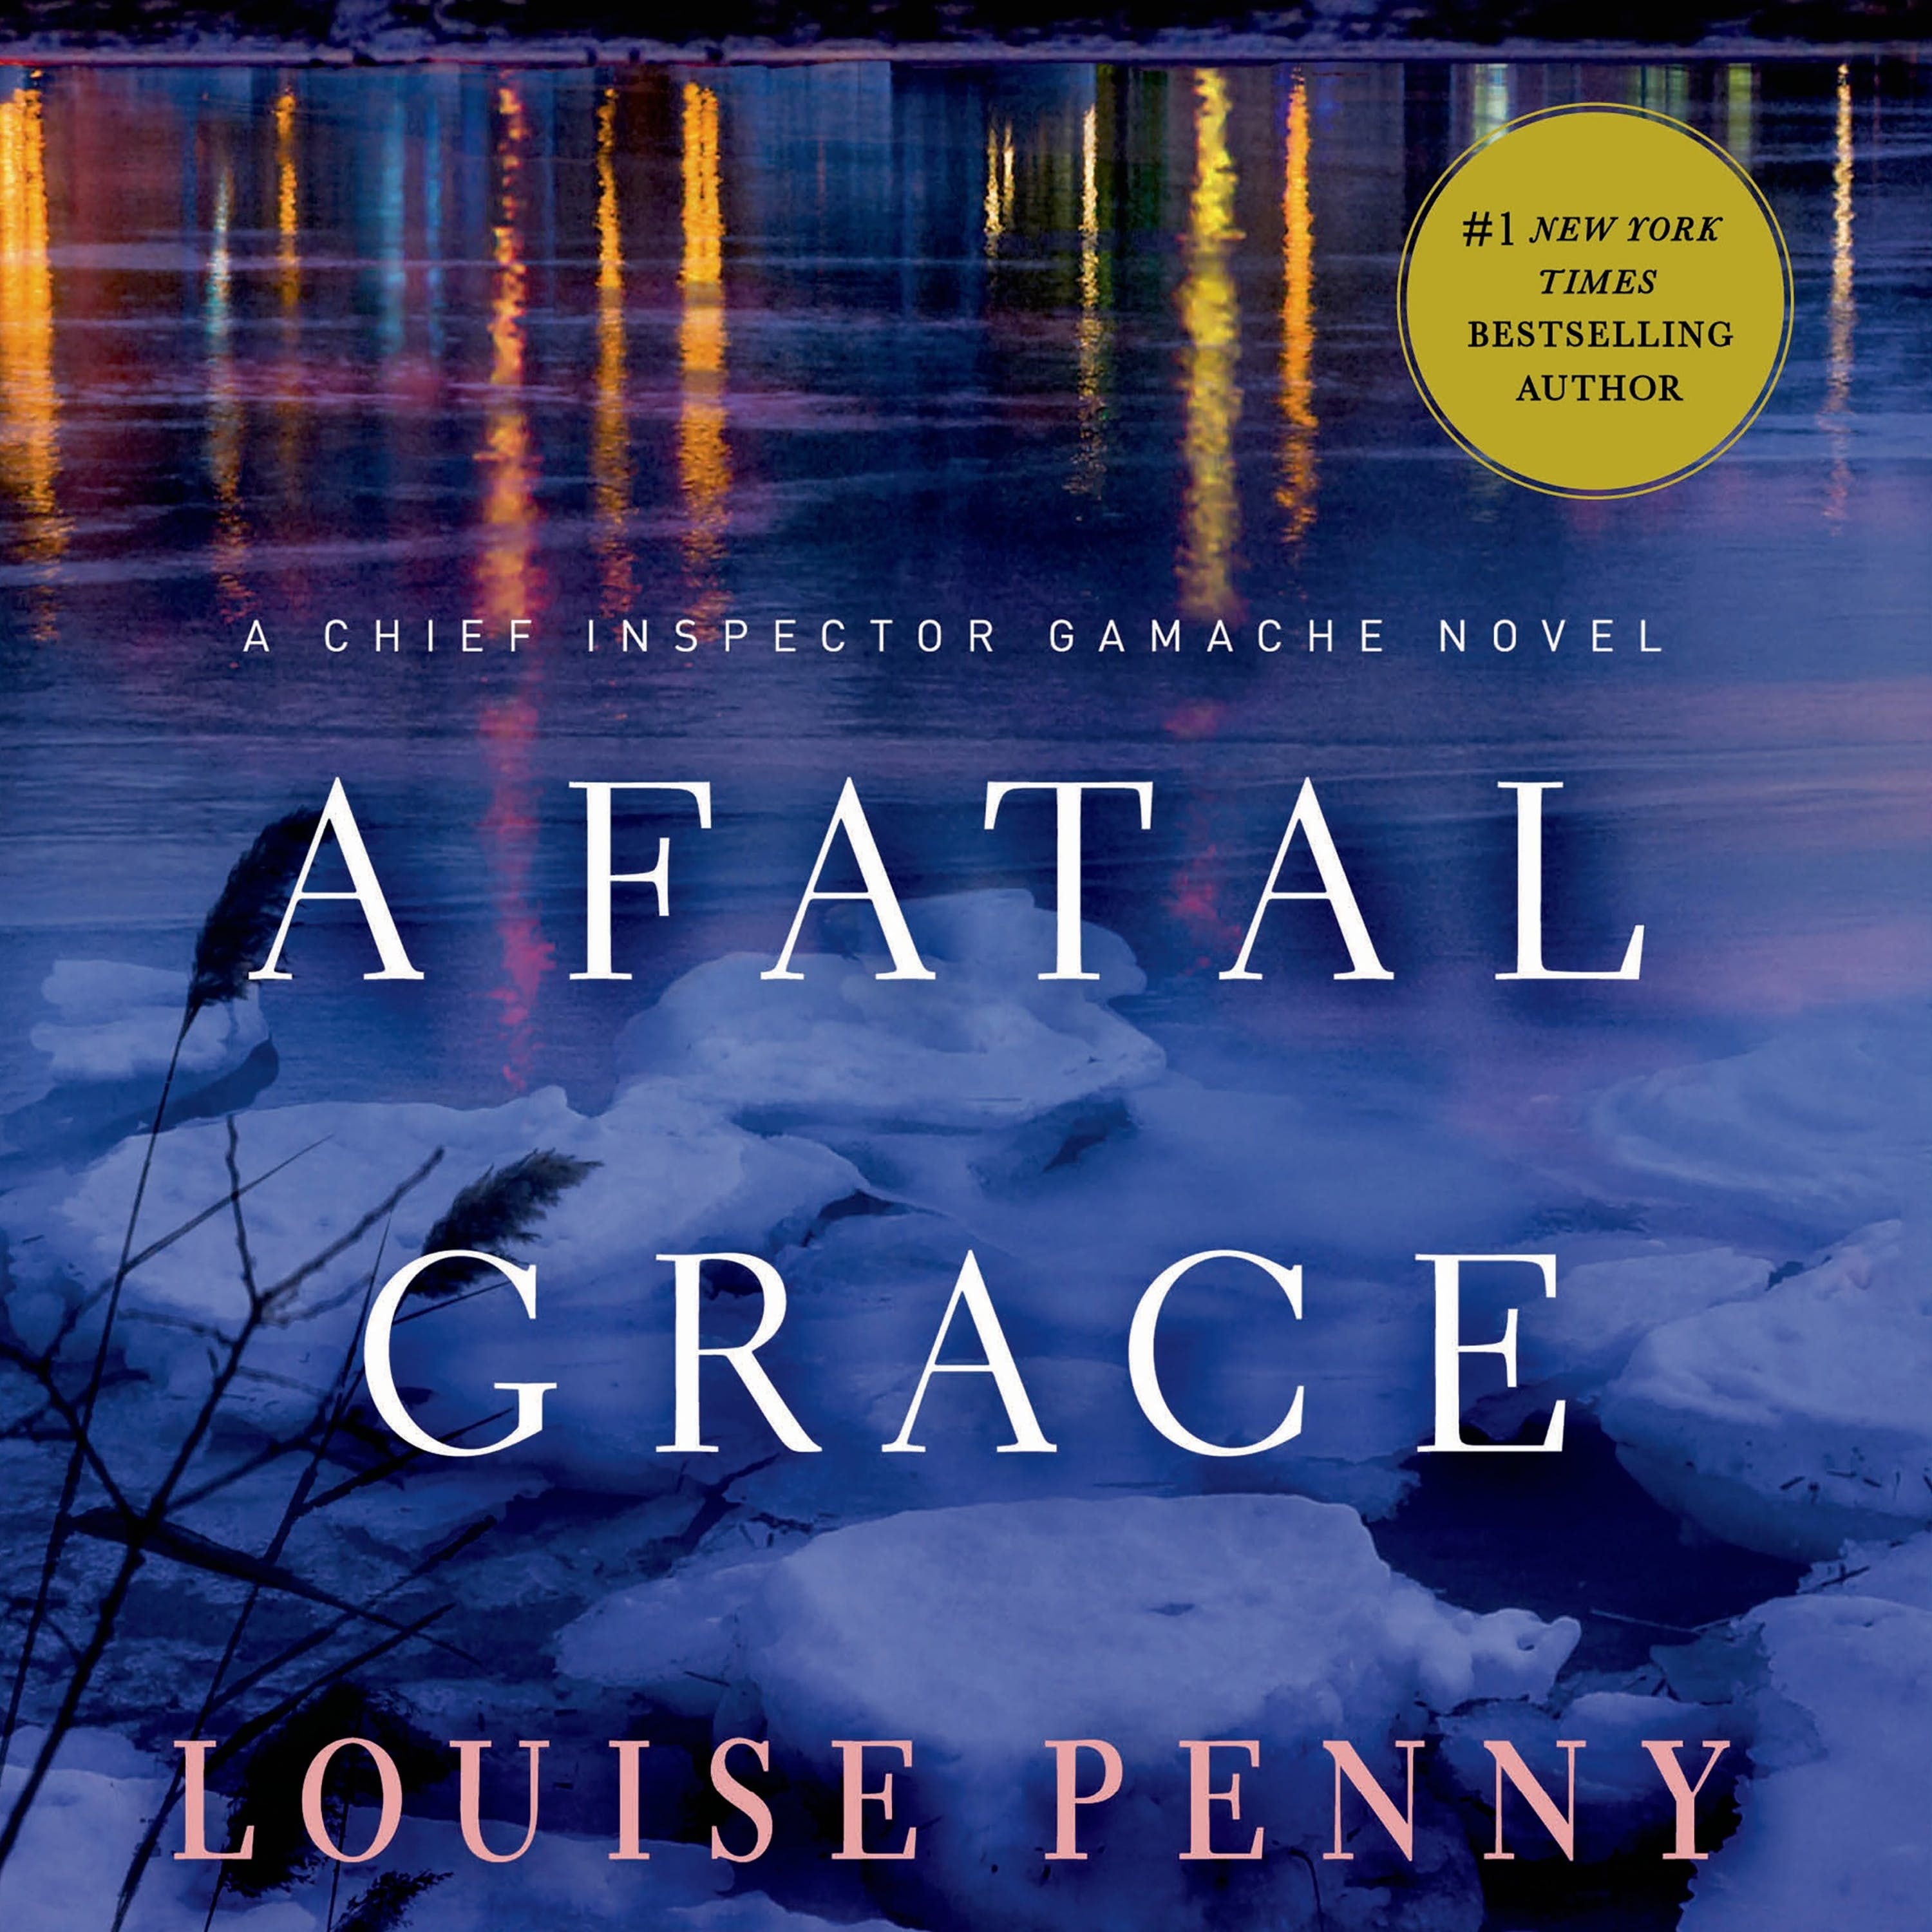 Audiobook cover of A Fatal Grace by Louise Penny, background shows ice and snow on a lake